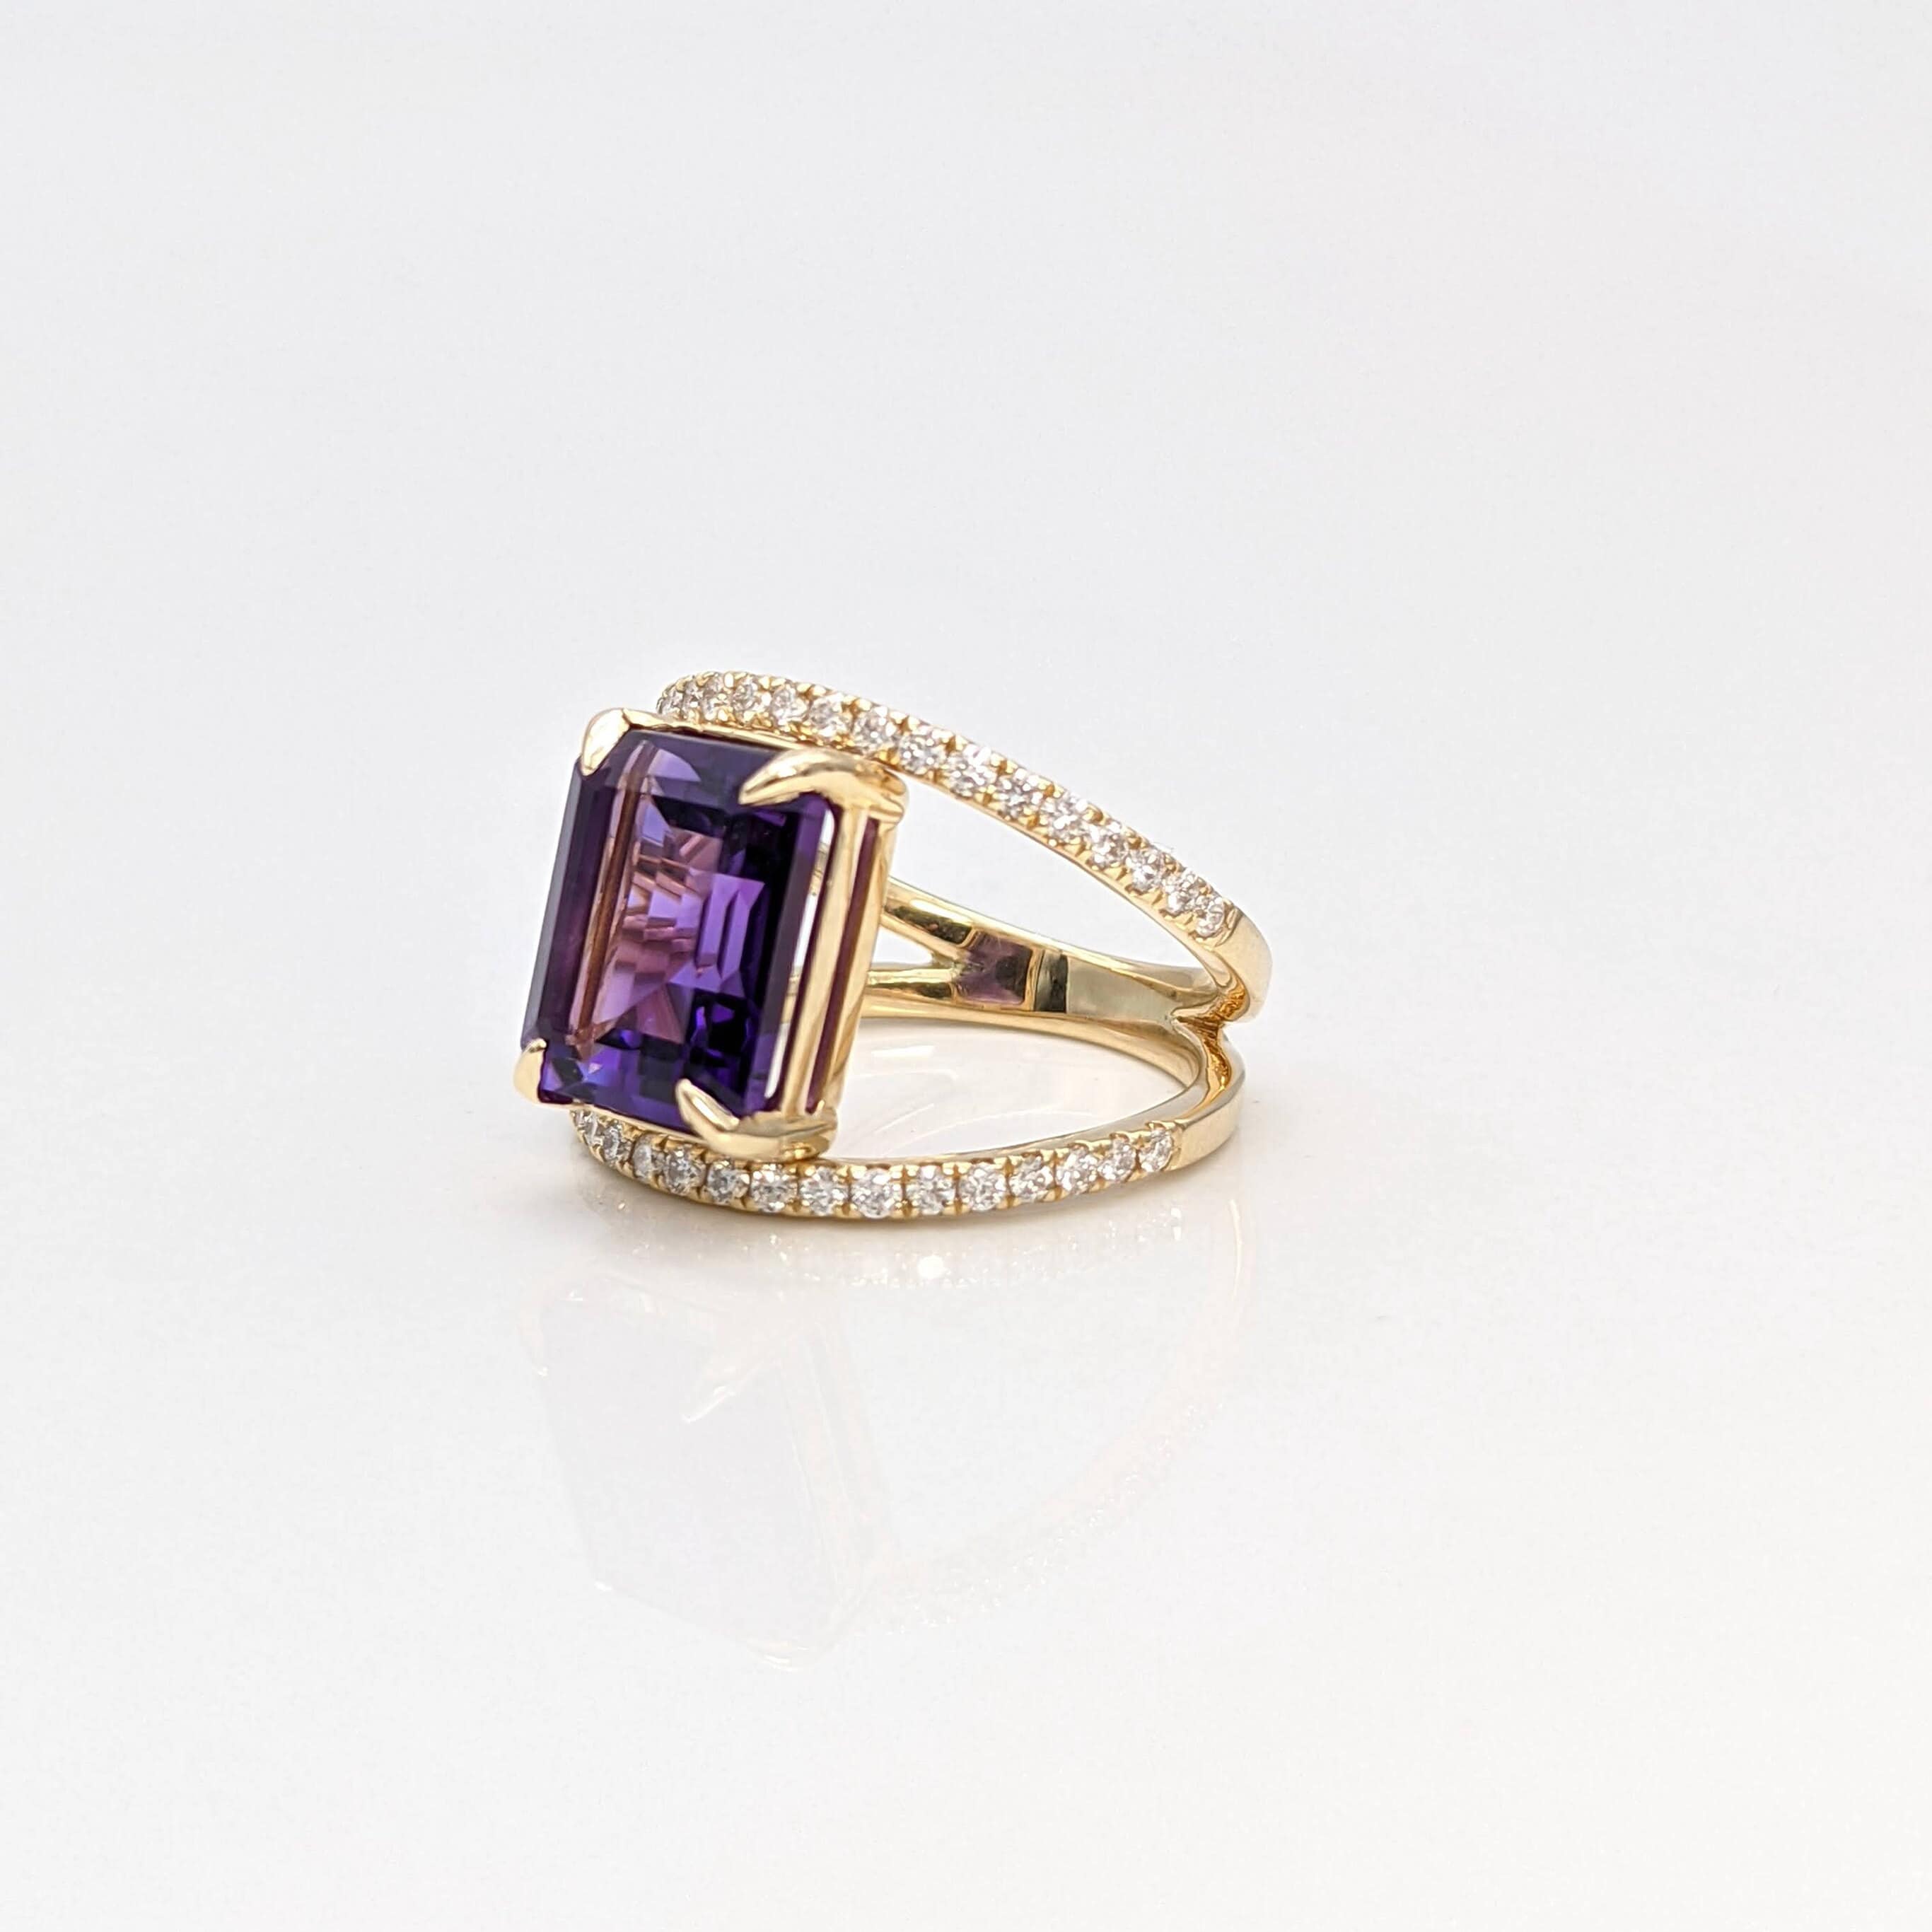 Statement Rings-Large Amethyst Ring w All Natural Diamond Accents in Solid 14k Yellow Gold | Emerald Cut 11x9mm | Open Split Shank | February Birthstone - NNJGemstones